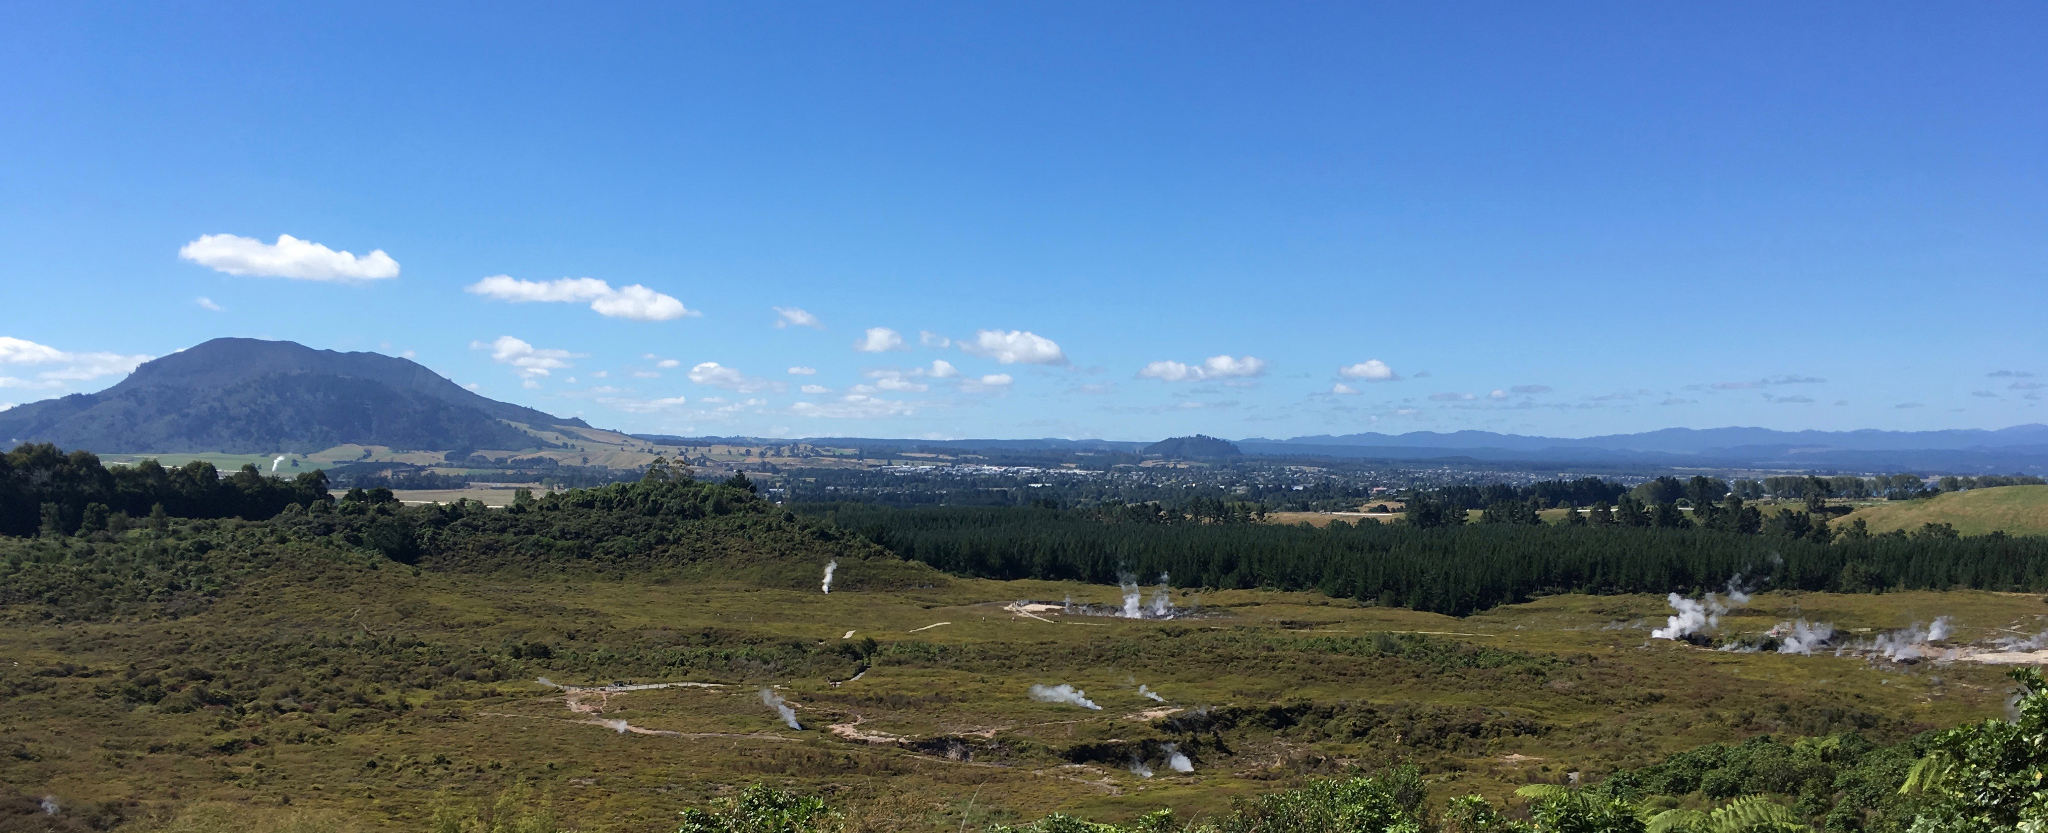 Craters Of The Moon, thats Mt Tauhara in the distance